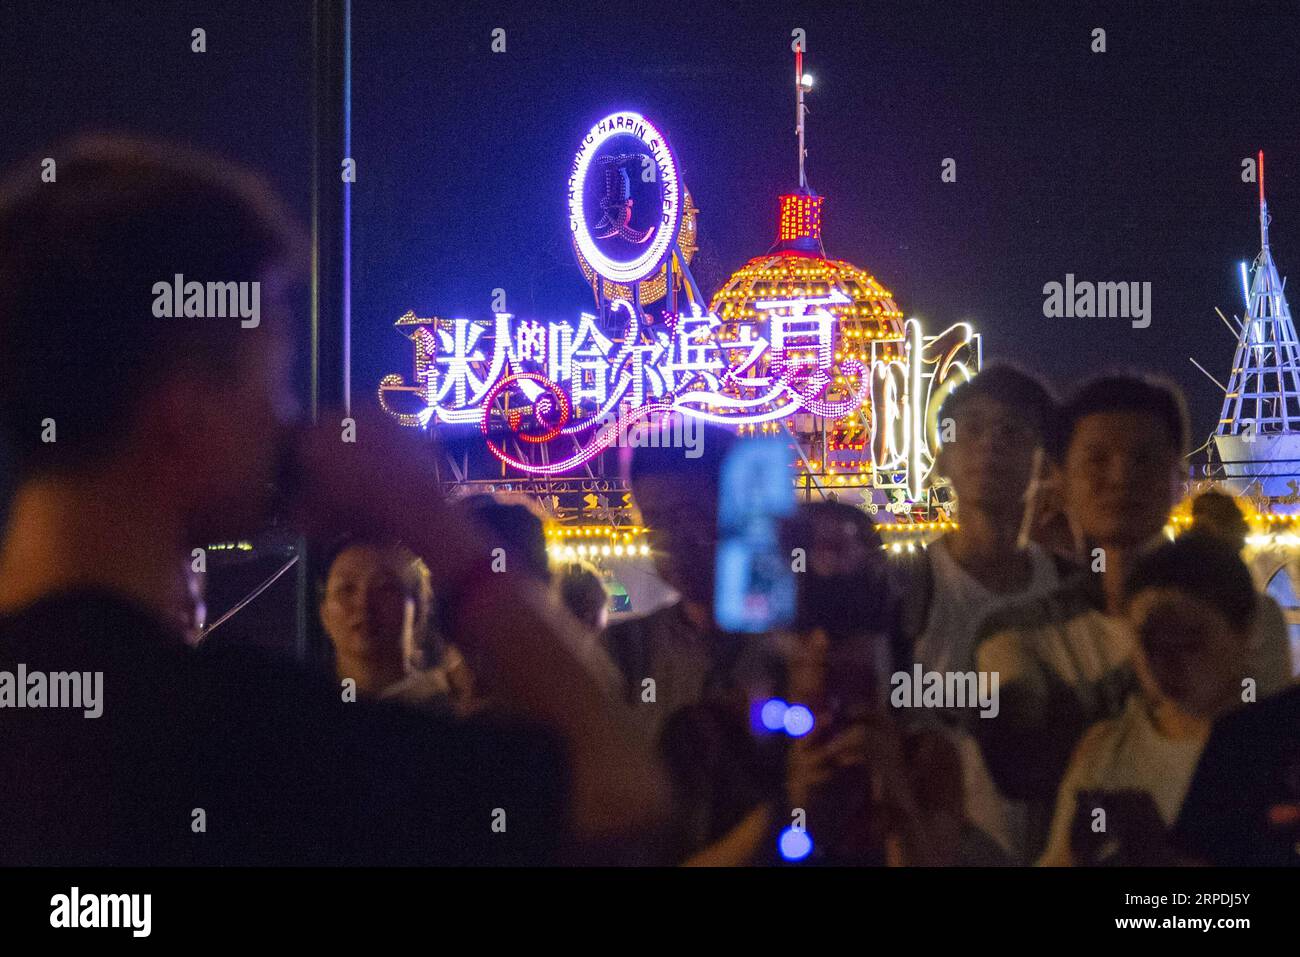 (190805) -- HARBIN, Aug. 5, 2019 -- People sing along Songhua River in Harbin, capital of northeast China s Heilongjiang Province, July 31, 2019. Attracted by the coolness in summer, many tourists come to Harbin for vacation. Meanwhile, Harbin is a city of music for the locals who got in touch with European classical music in an earlier time in China. With the cool summer and rich culture, Harbin received 36.23 million tourists and made revenue of 60.7 billion yuan (8.6 billion U.S. dollars) in the summer of 2018. ) CHINA-HEILONGJIANG-HARBIN-SUMMER-TOURISM(CN) XiexJianfei PUBLICATIONxNOTxINxCH Stock Photo